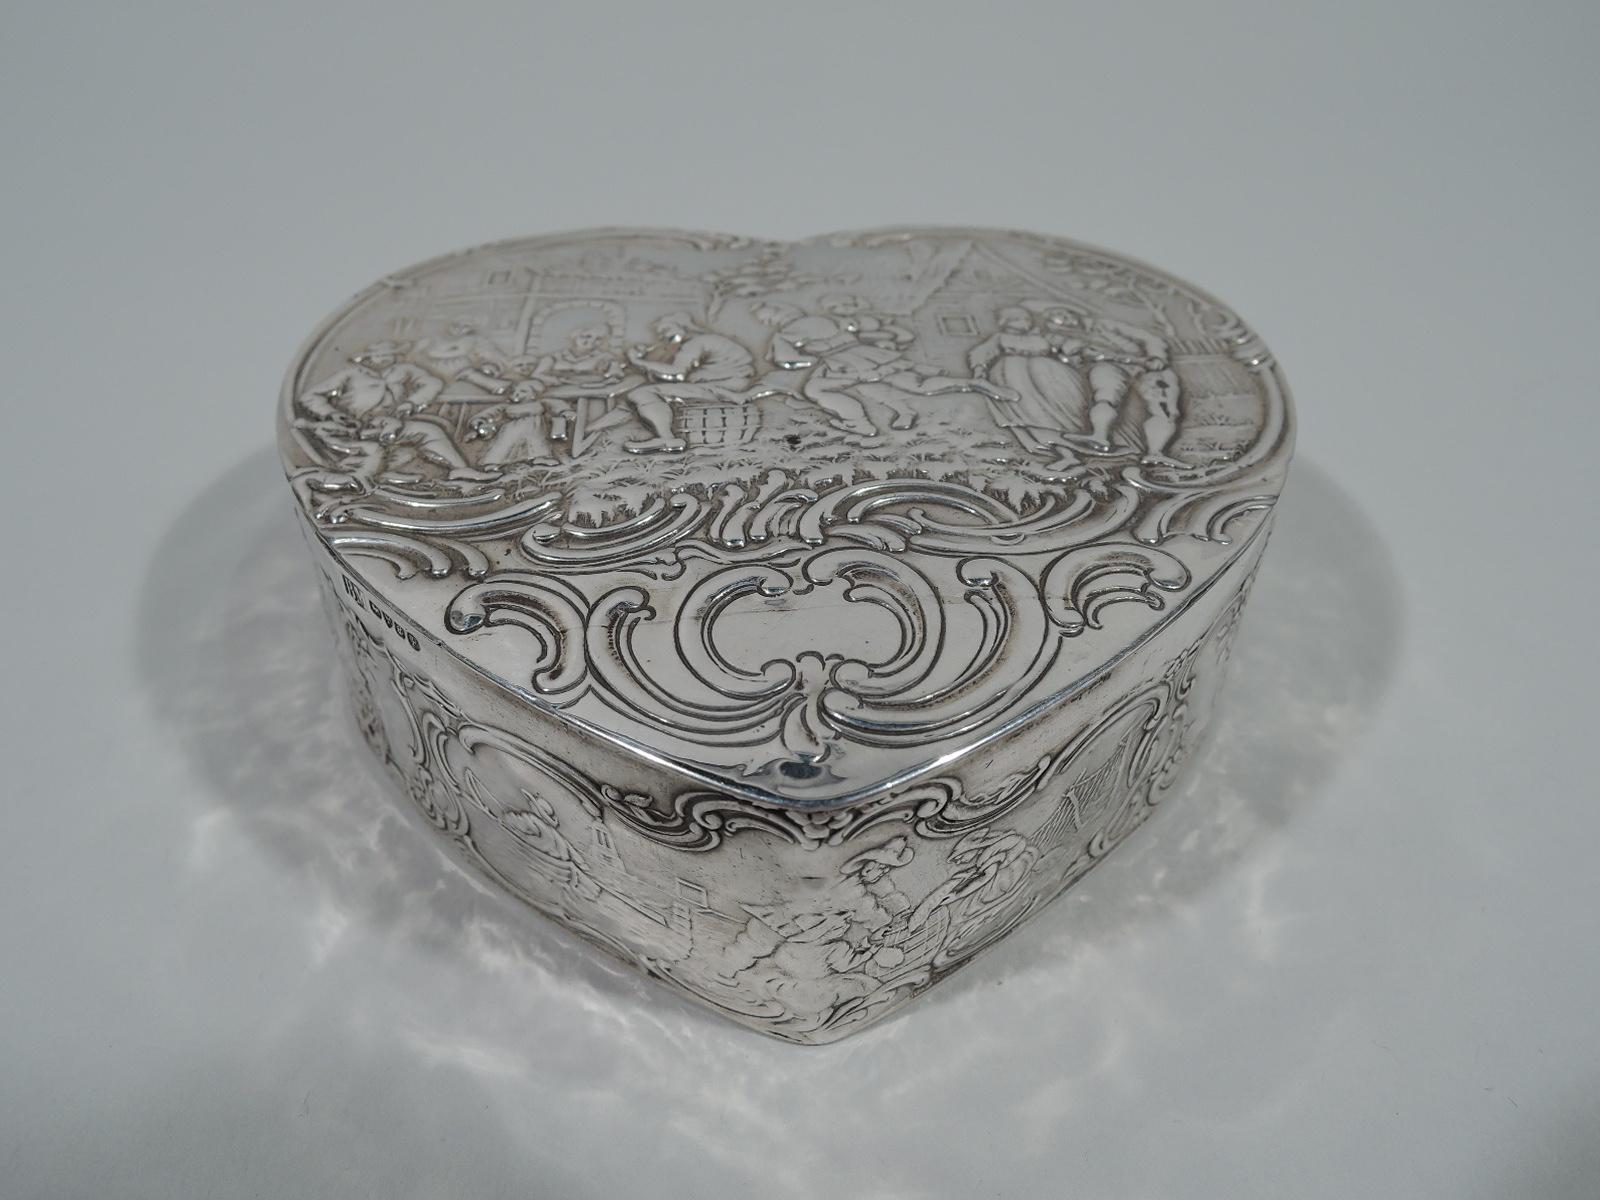 German sterling silver heart box. Imported to England by Berthold Muller in Chester in 1904. Straight sides and flat hinged cover. Chased olden-days scenes with merrymaking and laboring peasants: Dancing and feasting as well as planting and fishing.